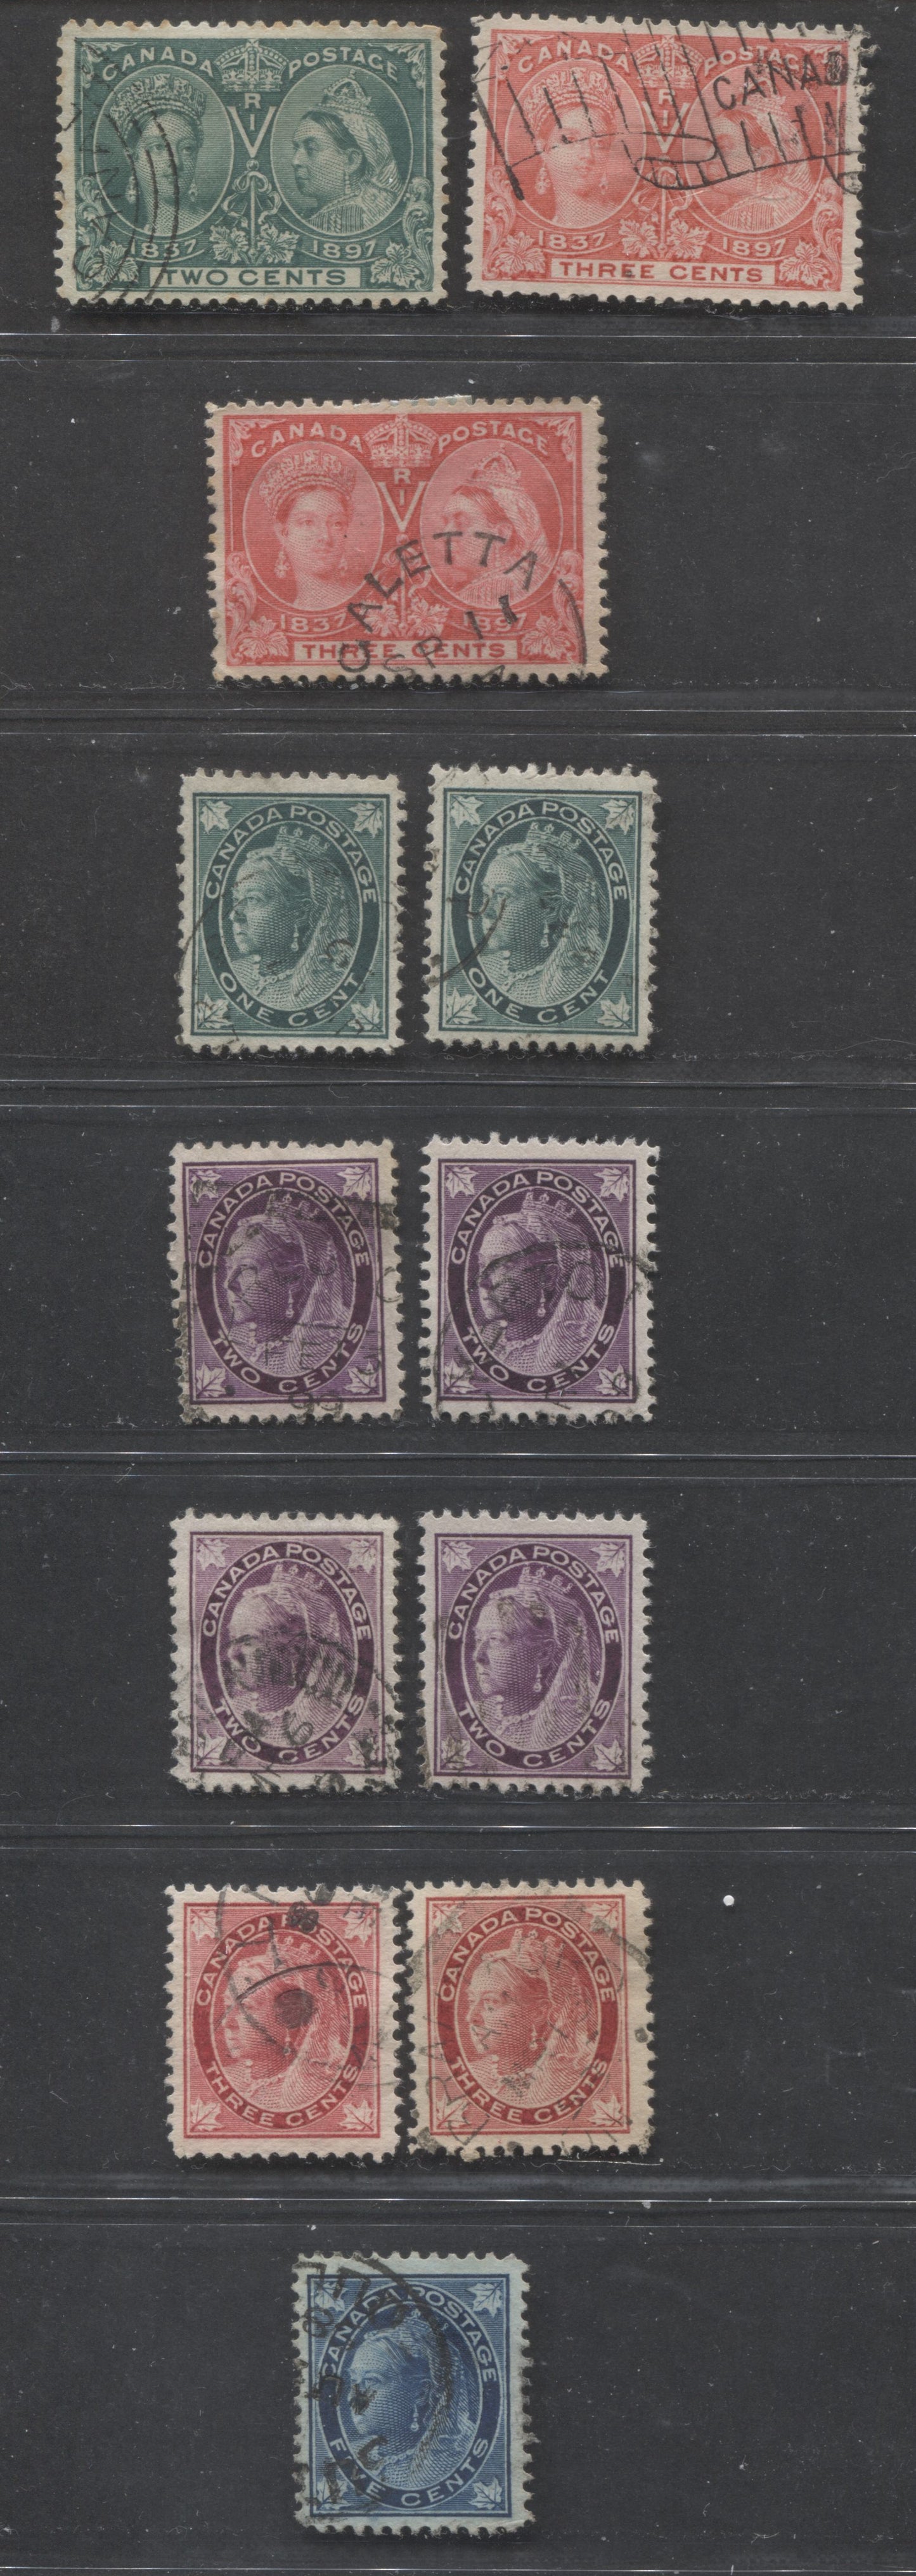 Lot 246 Canada #52, 53, 53i, 67-70 1c, 2c, 3c, 5c Green - Dark Blue Queen Victoria, 1897 Diamond Jubilee & Maple Leaf Issue, 12 VF Used Singles, All With Different Papers or Shades